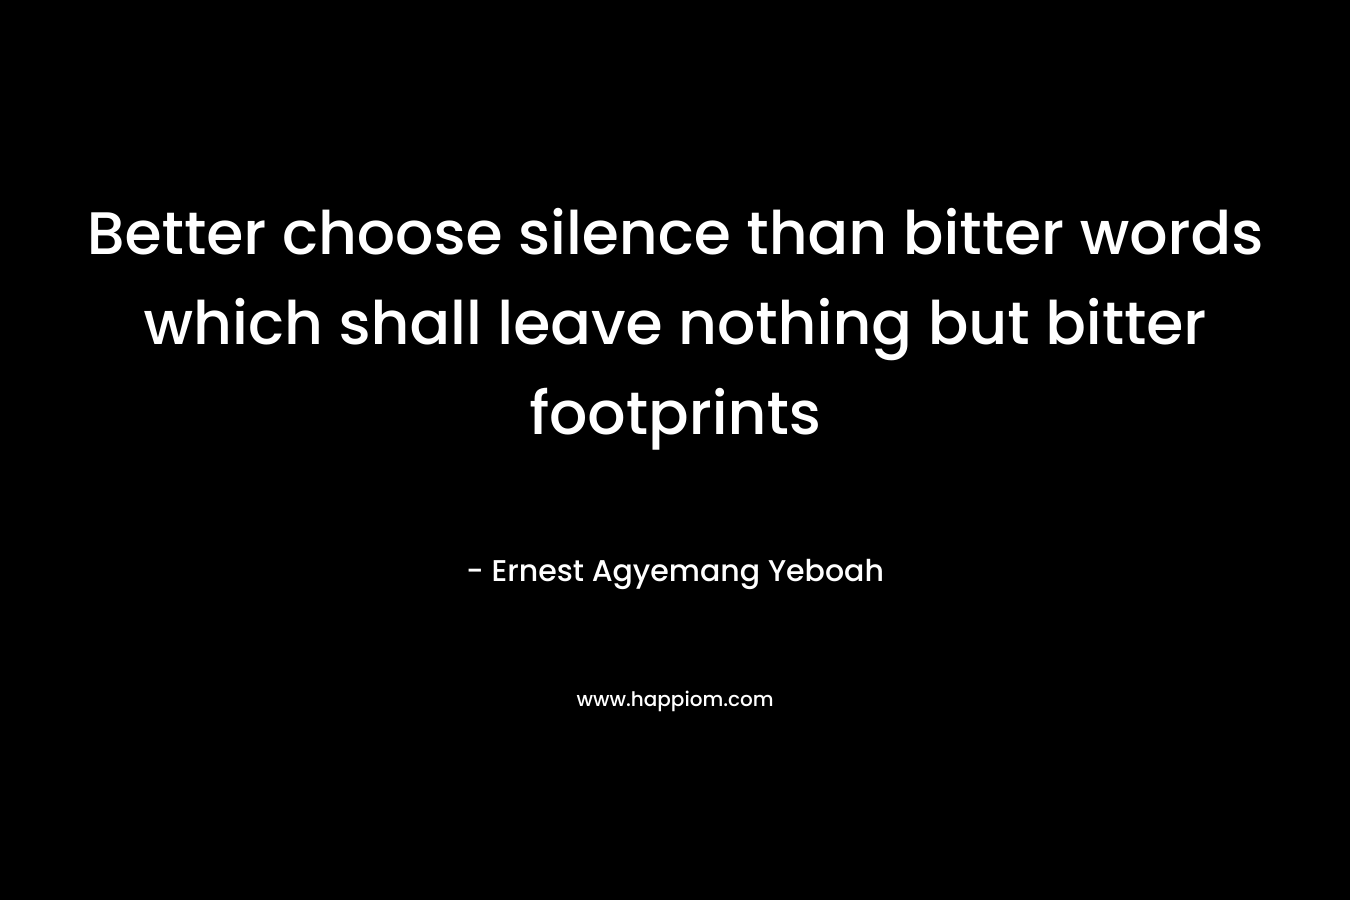 Better choose silence than bitter words which shall leave nothing but bitter footprints